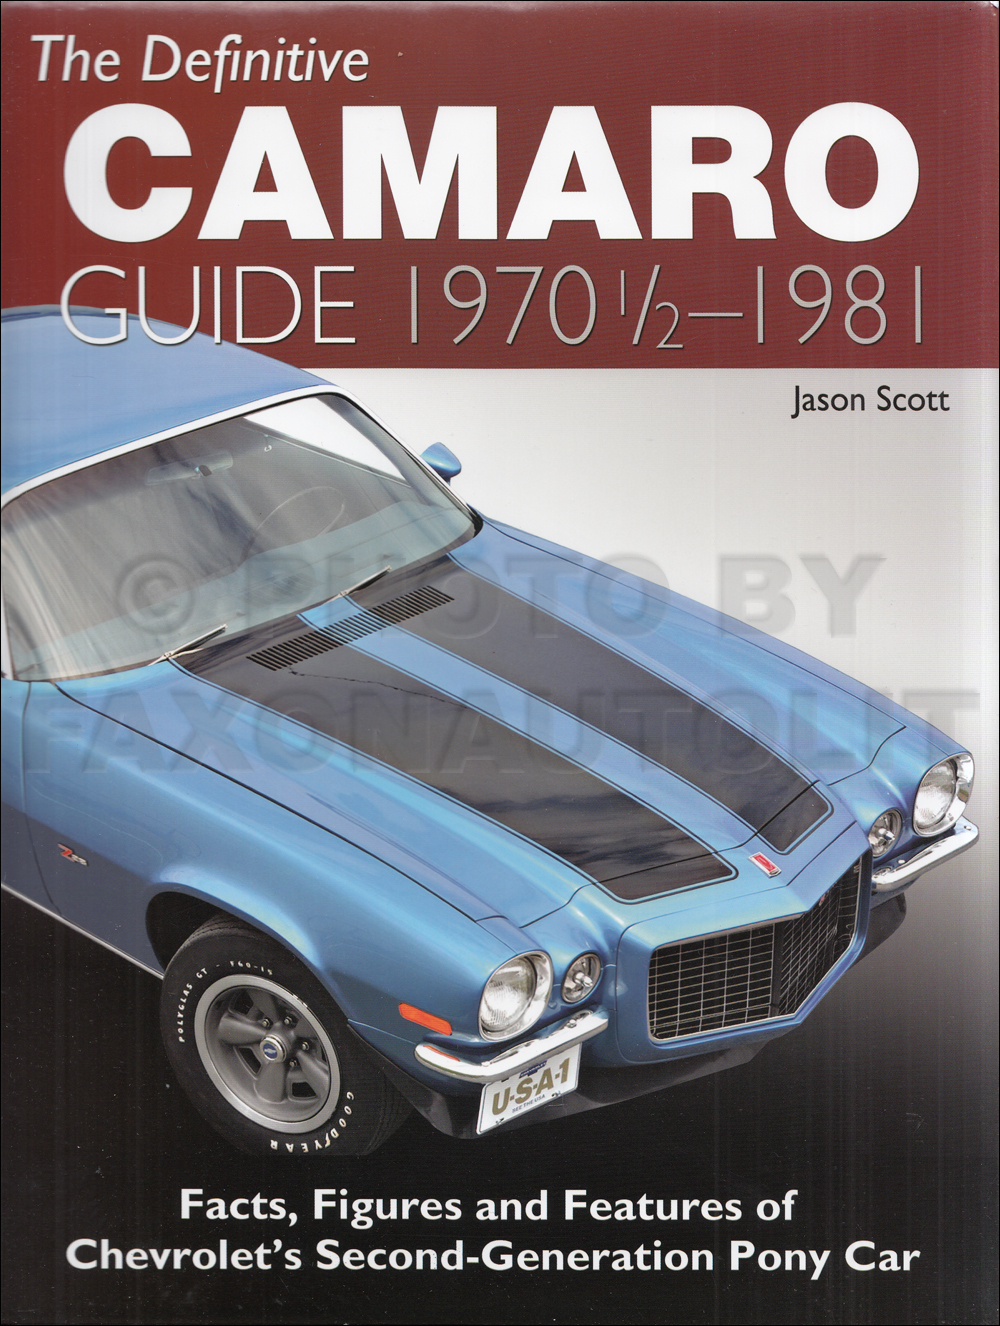 1970-1981 Definitive Camaro Guide: Facts, Figures and Features